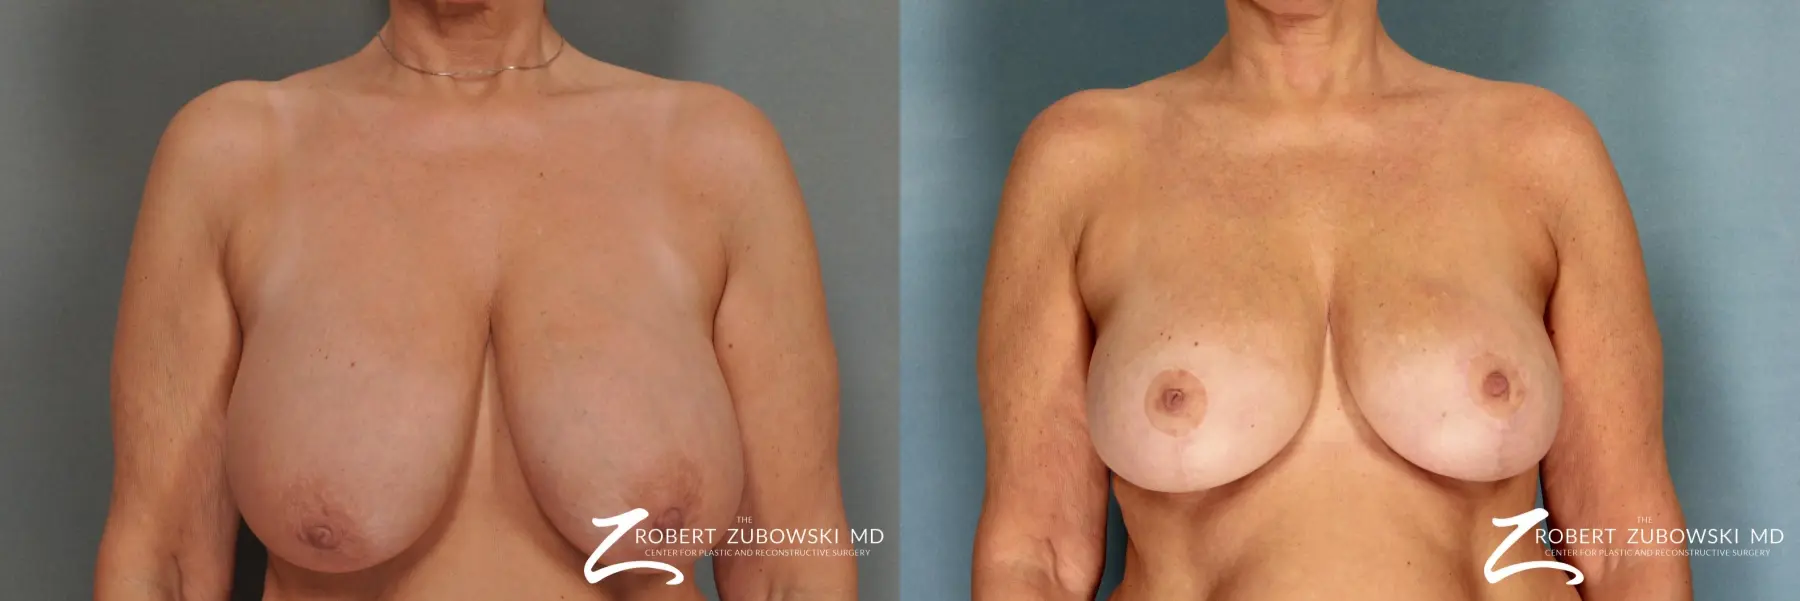 Breast Reduction: Patient 1 - Before and After 1